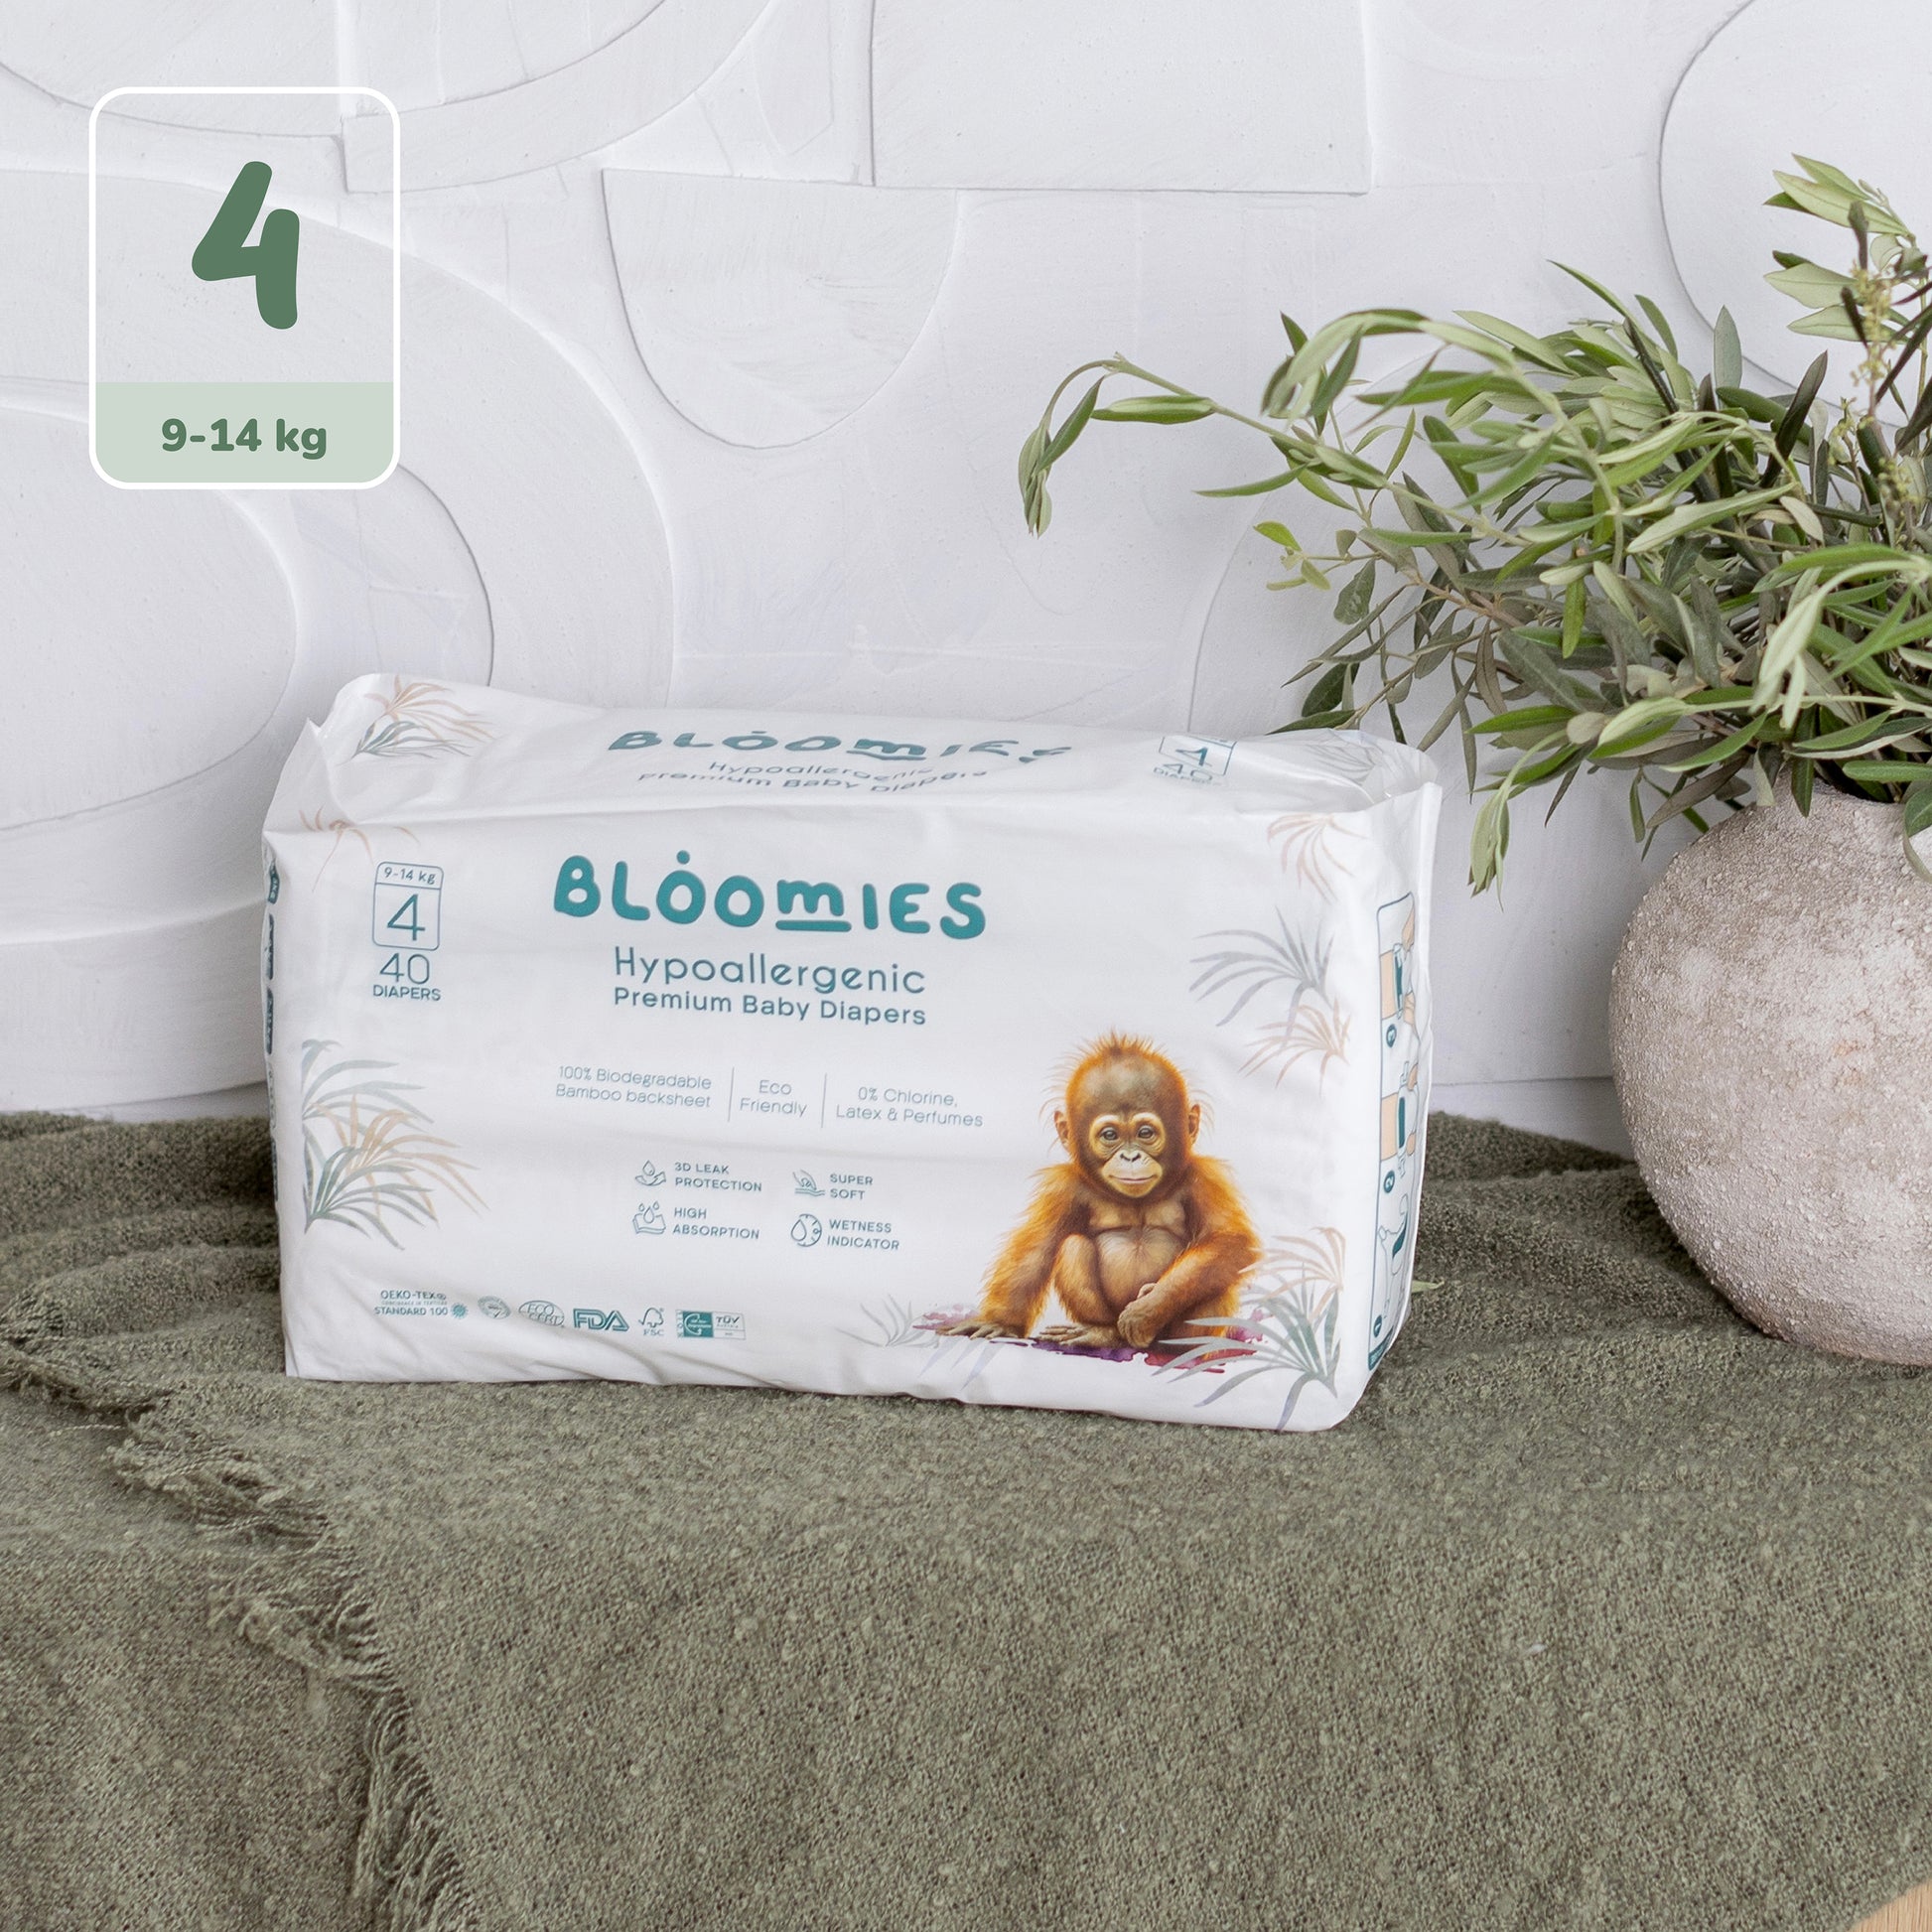 Premium Baby Diapers - Size 4 box with flower pot